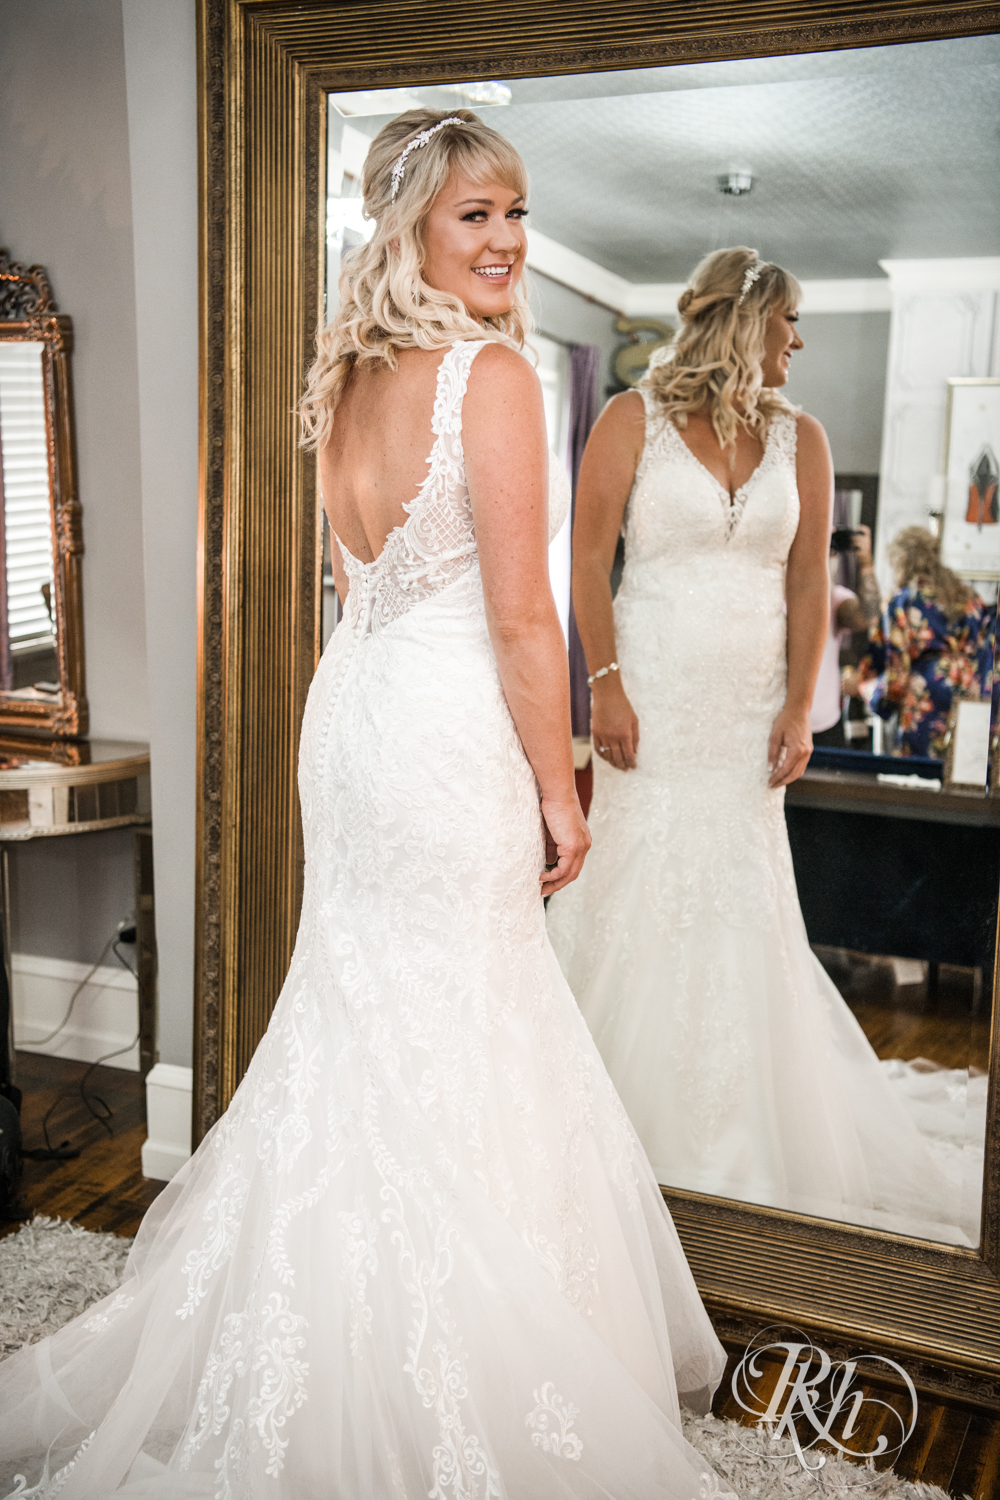 Bride standing in front of mirror before wedding at the Semple Mansion in Minneapolis, Minnesota.